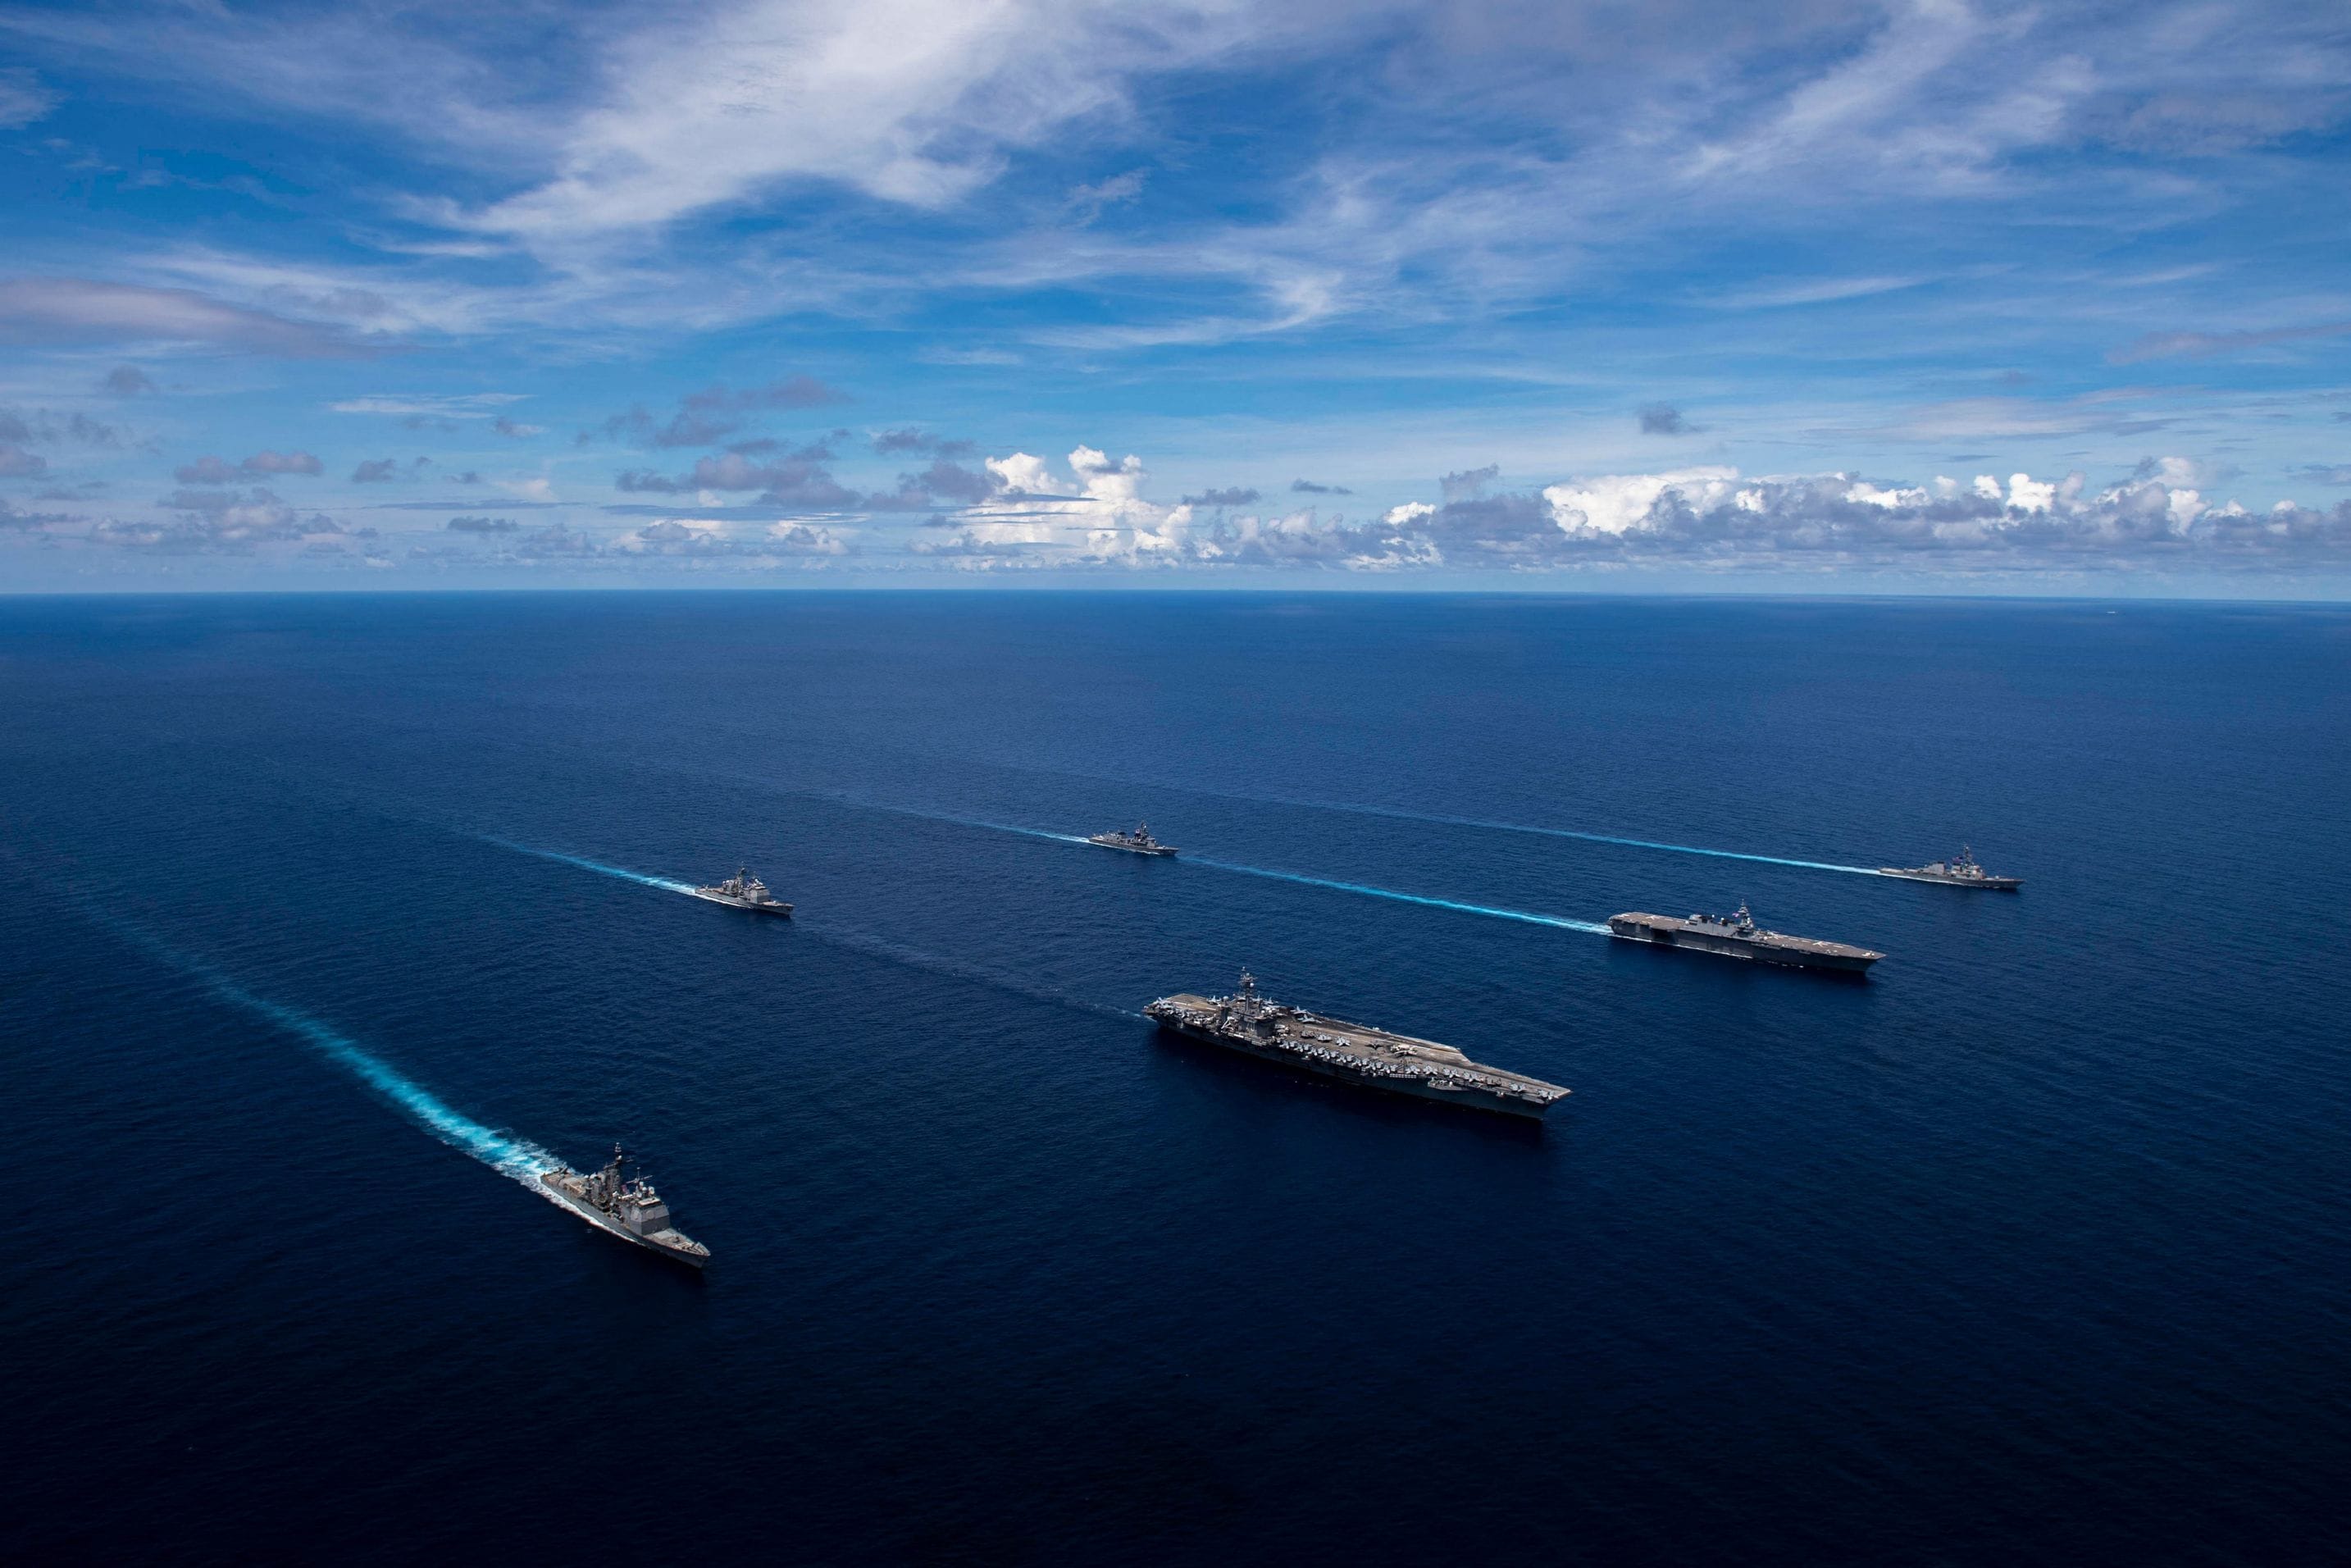 Competing Visions of International Order in the South China Sea